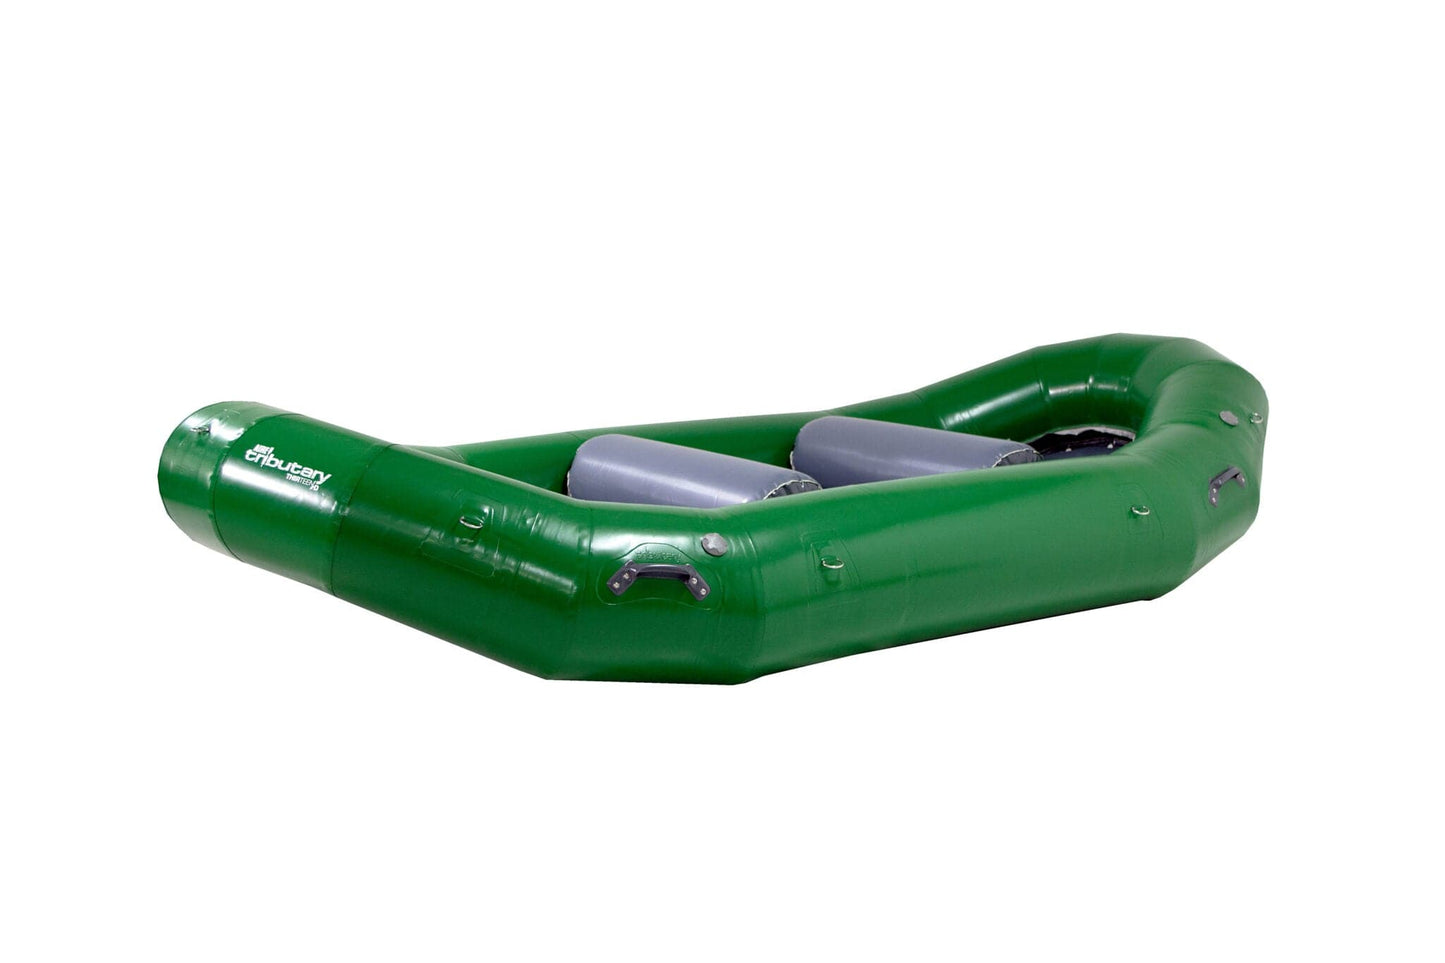 Featuring the Tributary HD 13 Self Bailing Raft raft manufactured by AIRE shown here from a second angle.